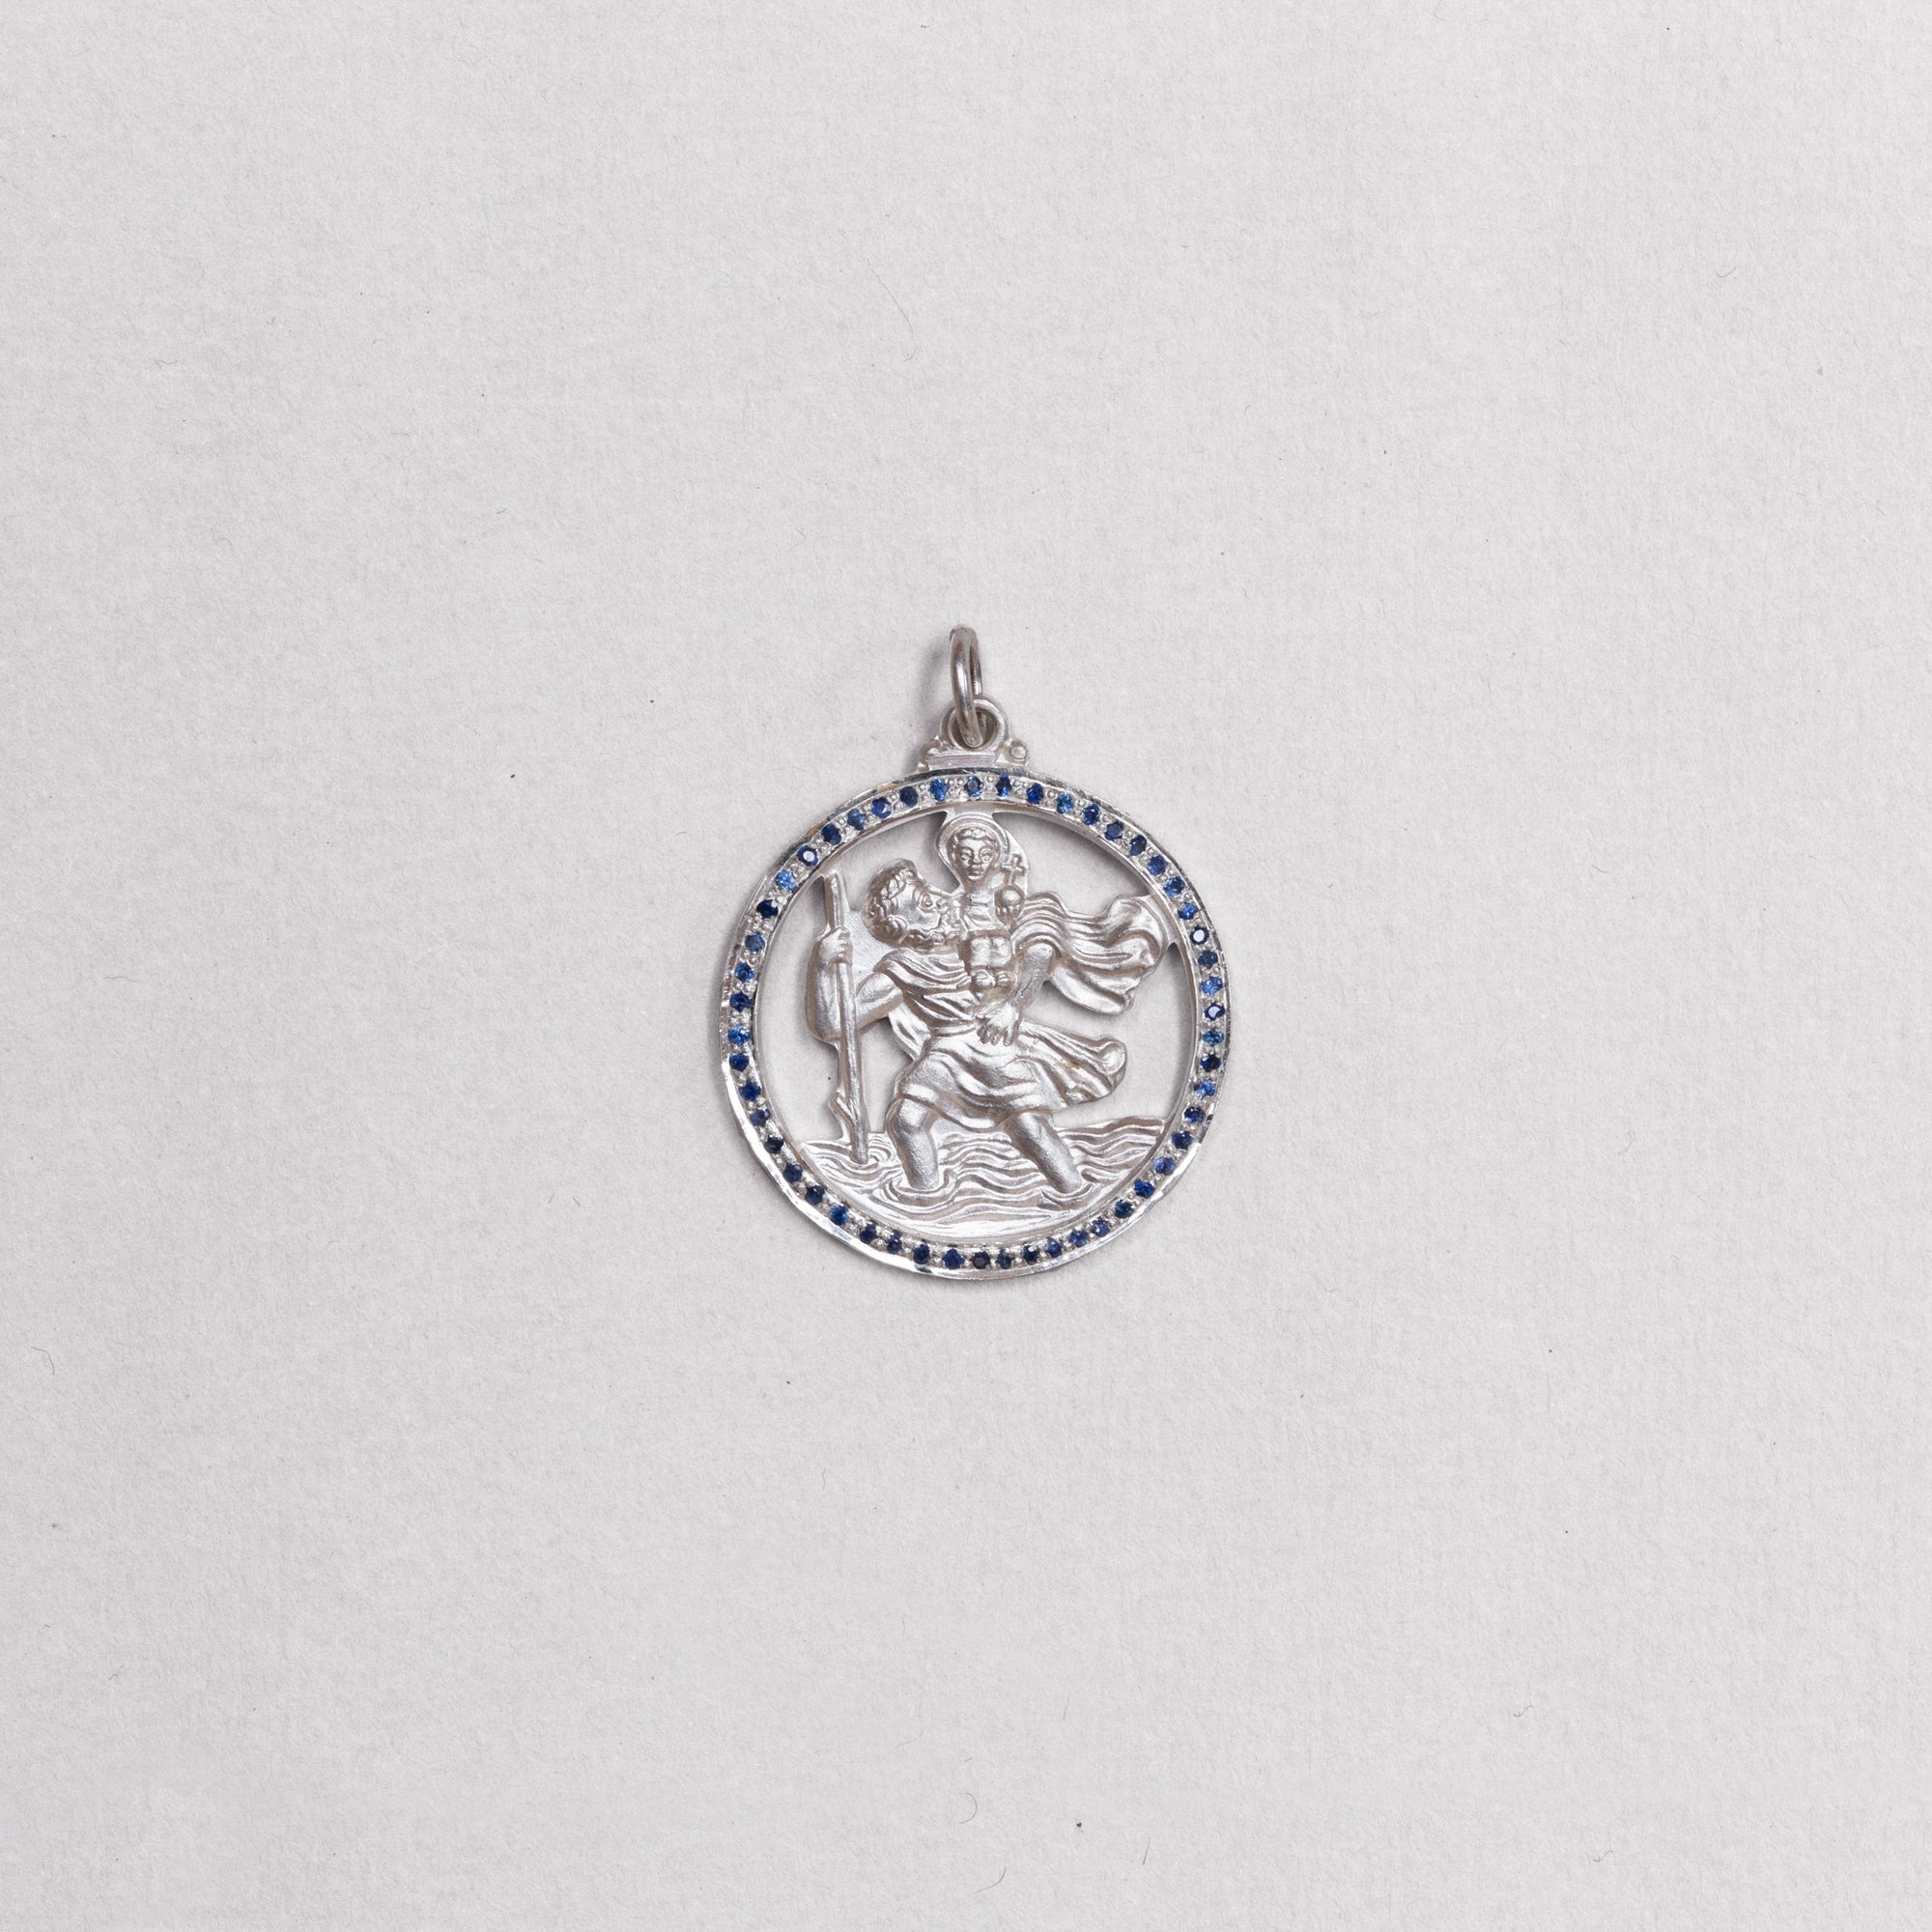 Vintage Silver St. Christopher Charm Pendant with Sapphires